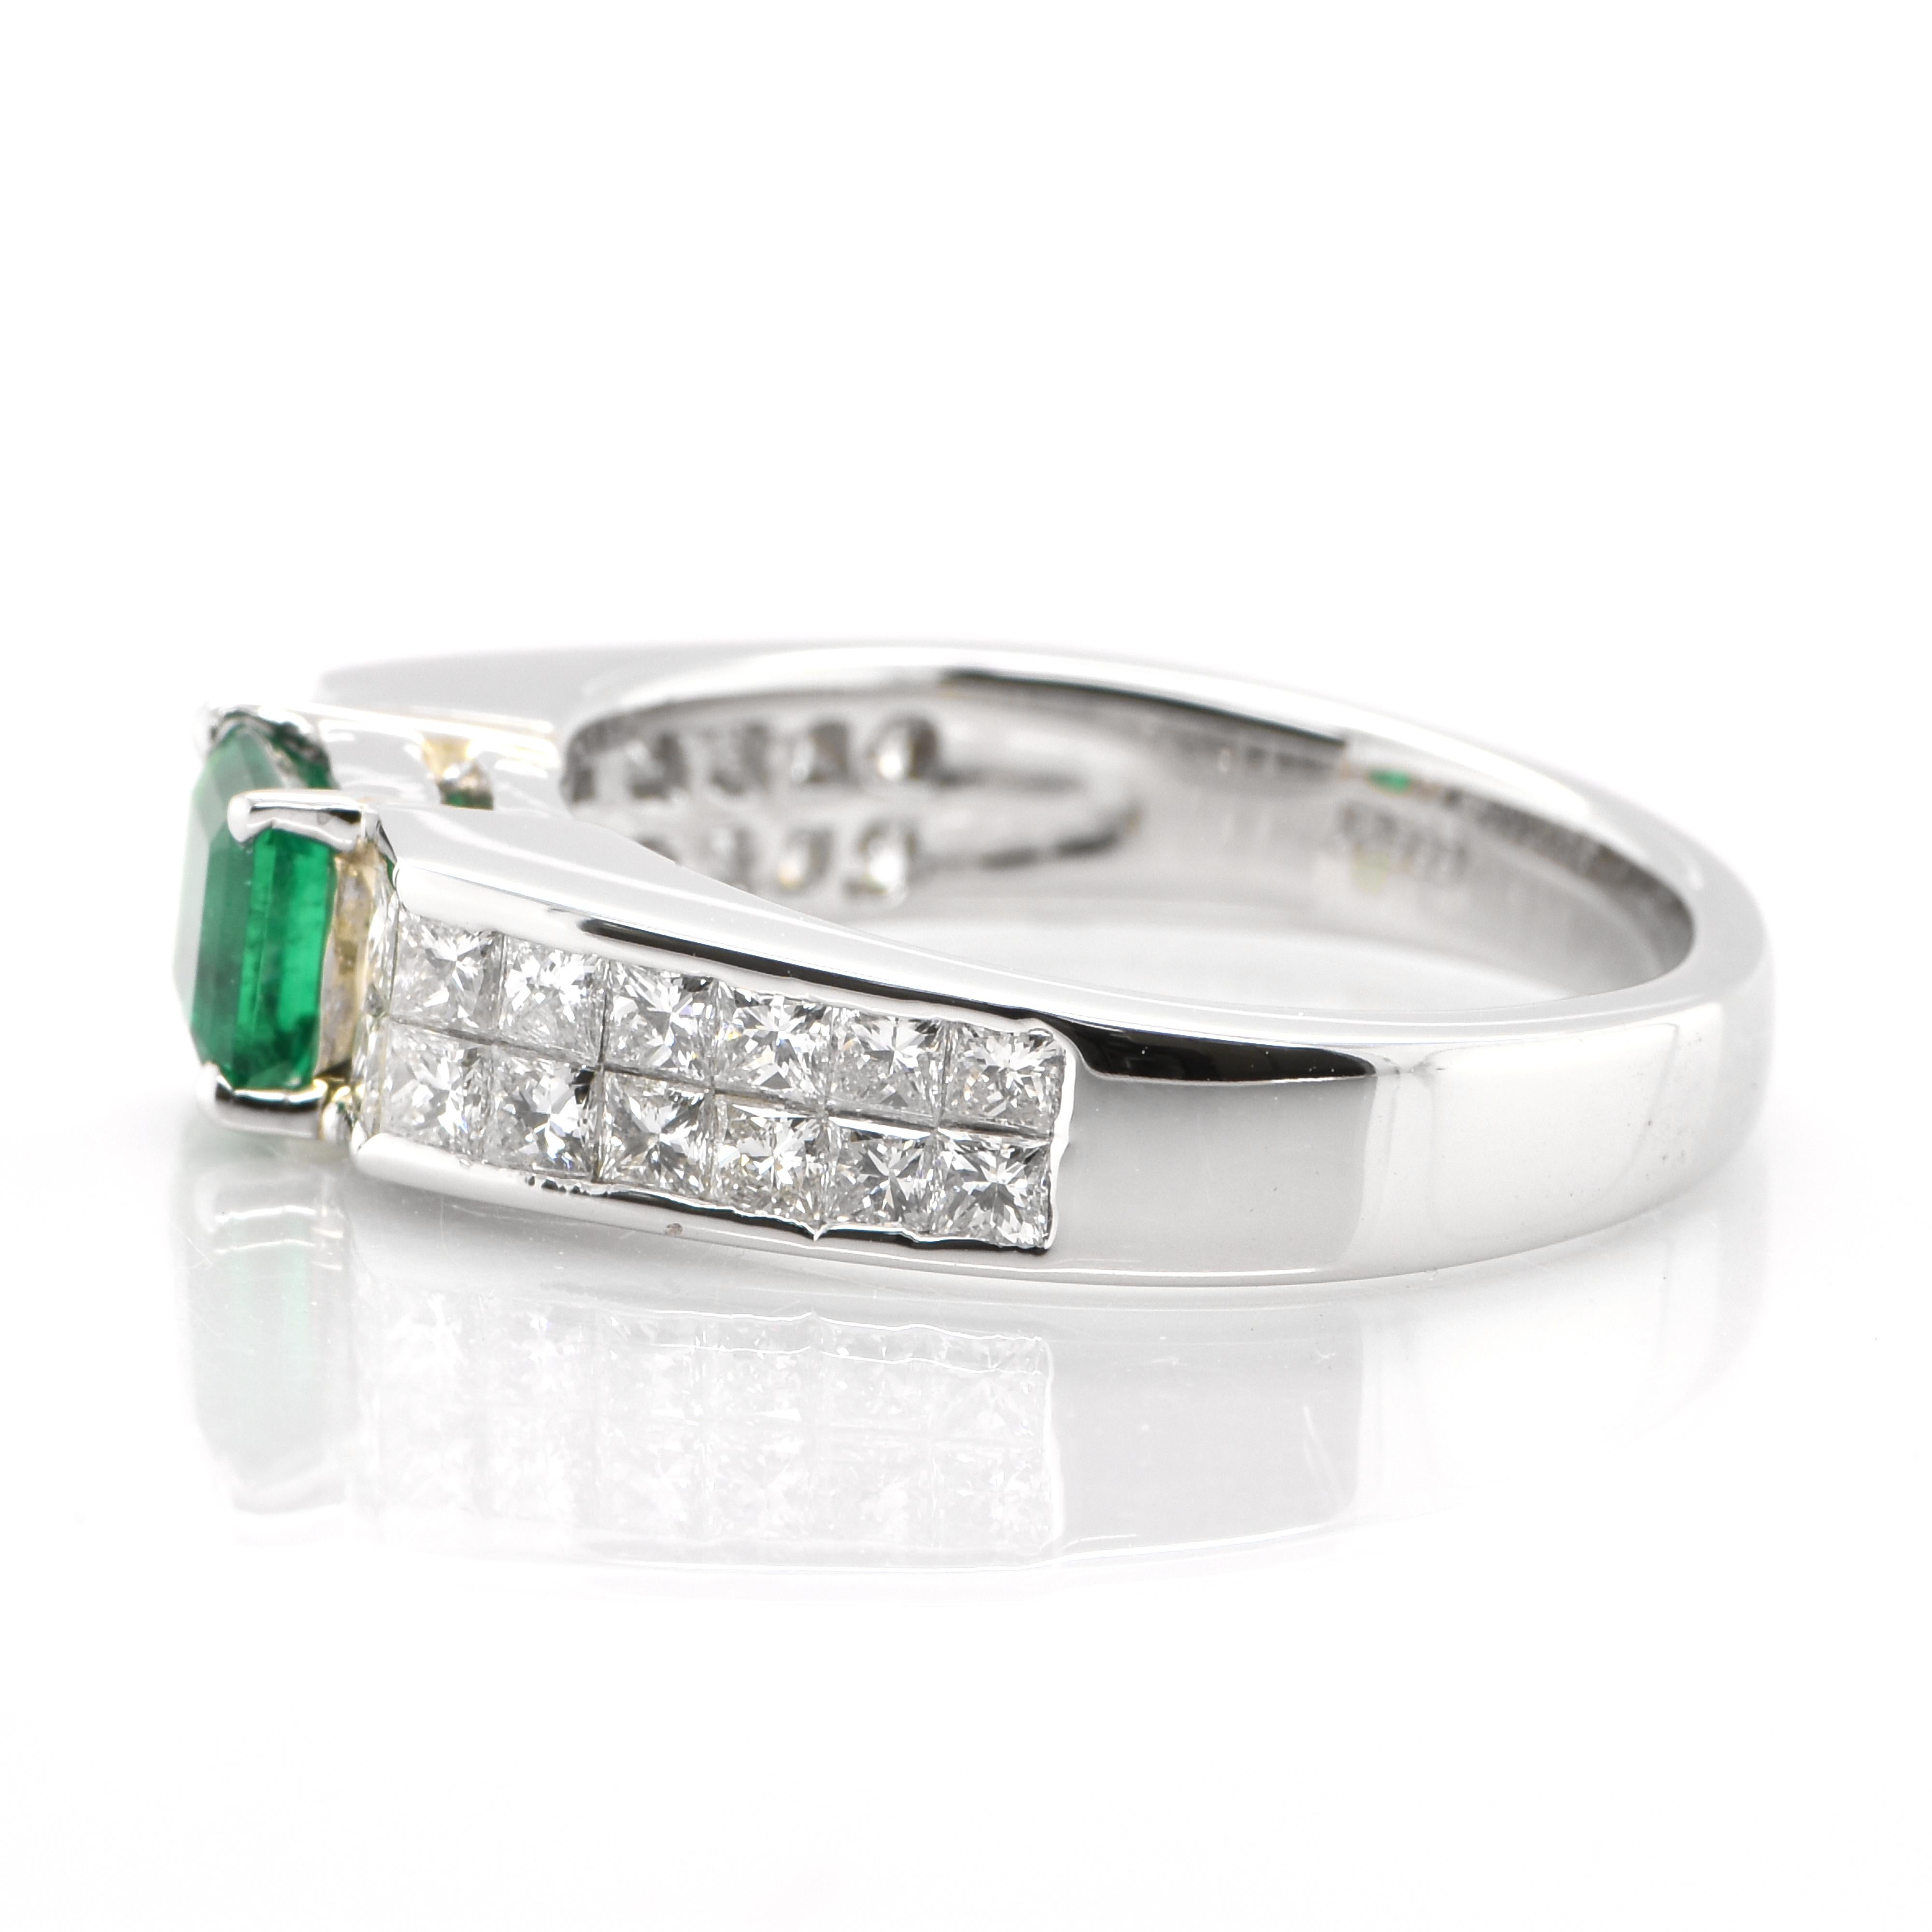 Emerald Cut 0.64 Carat Natural Emerald and Diamond Ring Set in Platinum For Sale